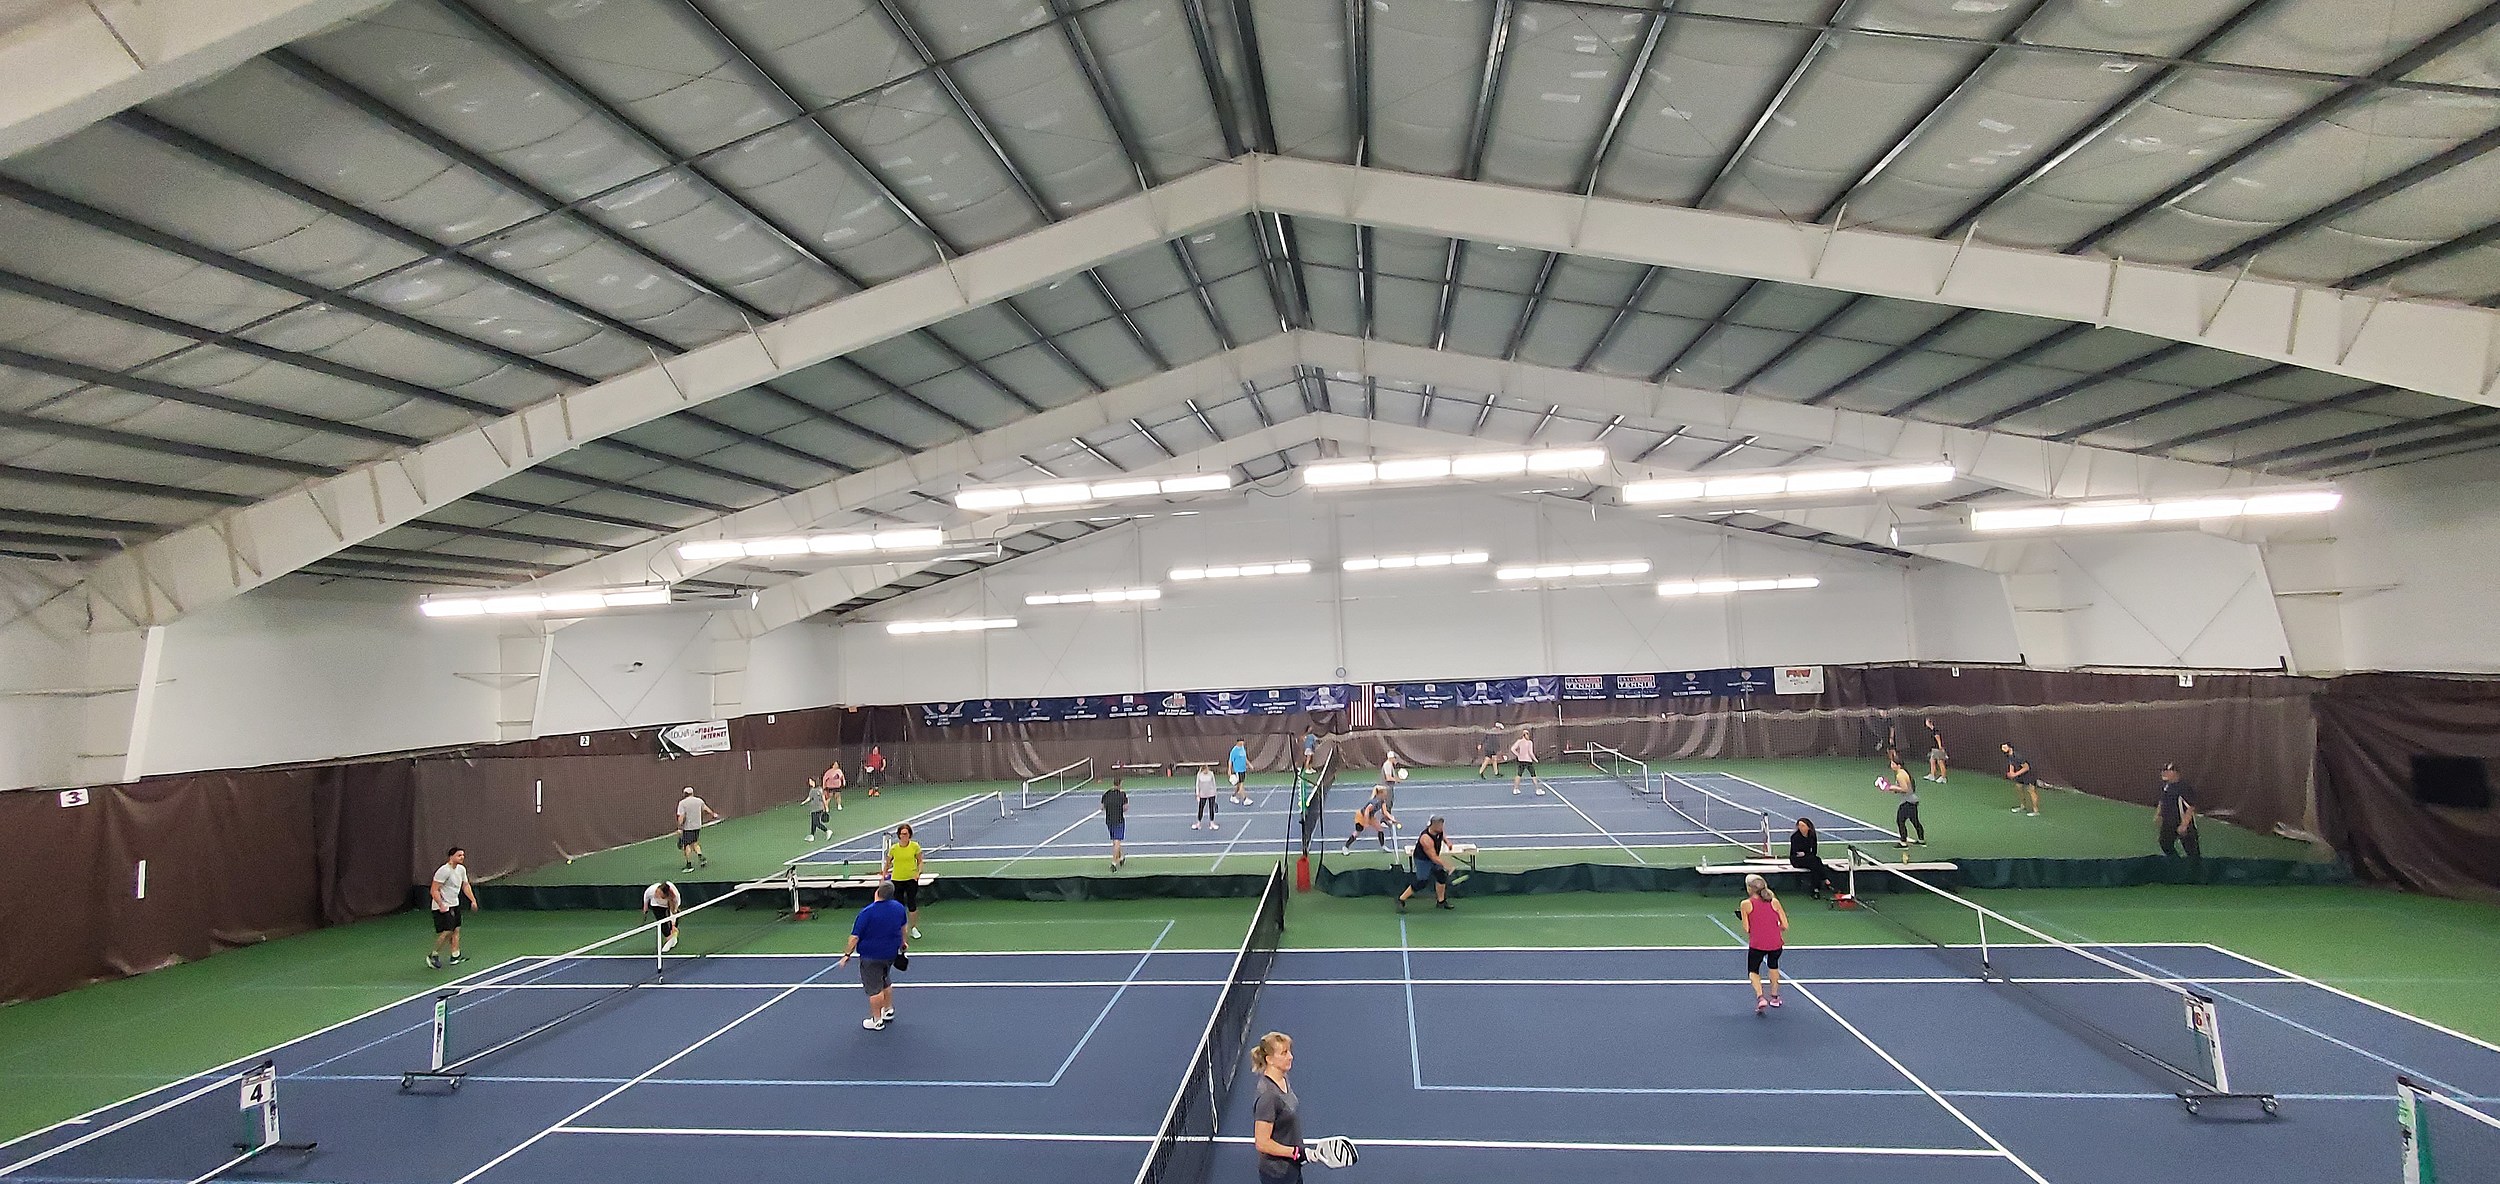 Play Pickleball at Blossom Athletic Center: Court Information